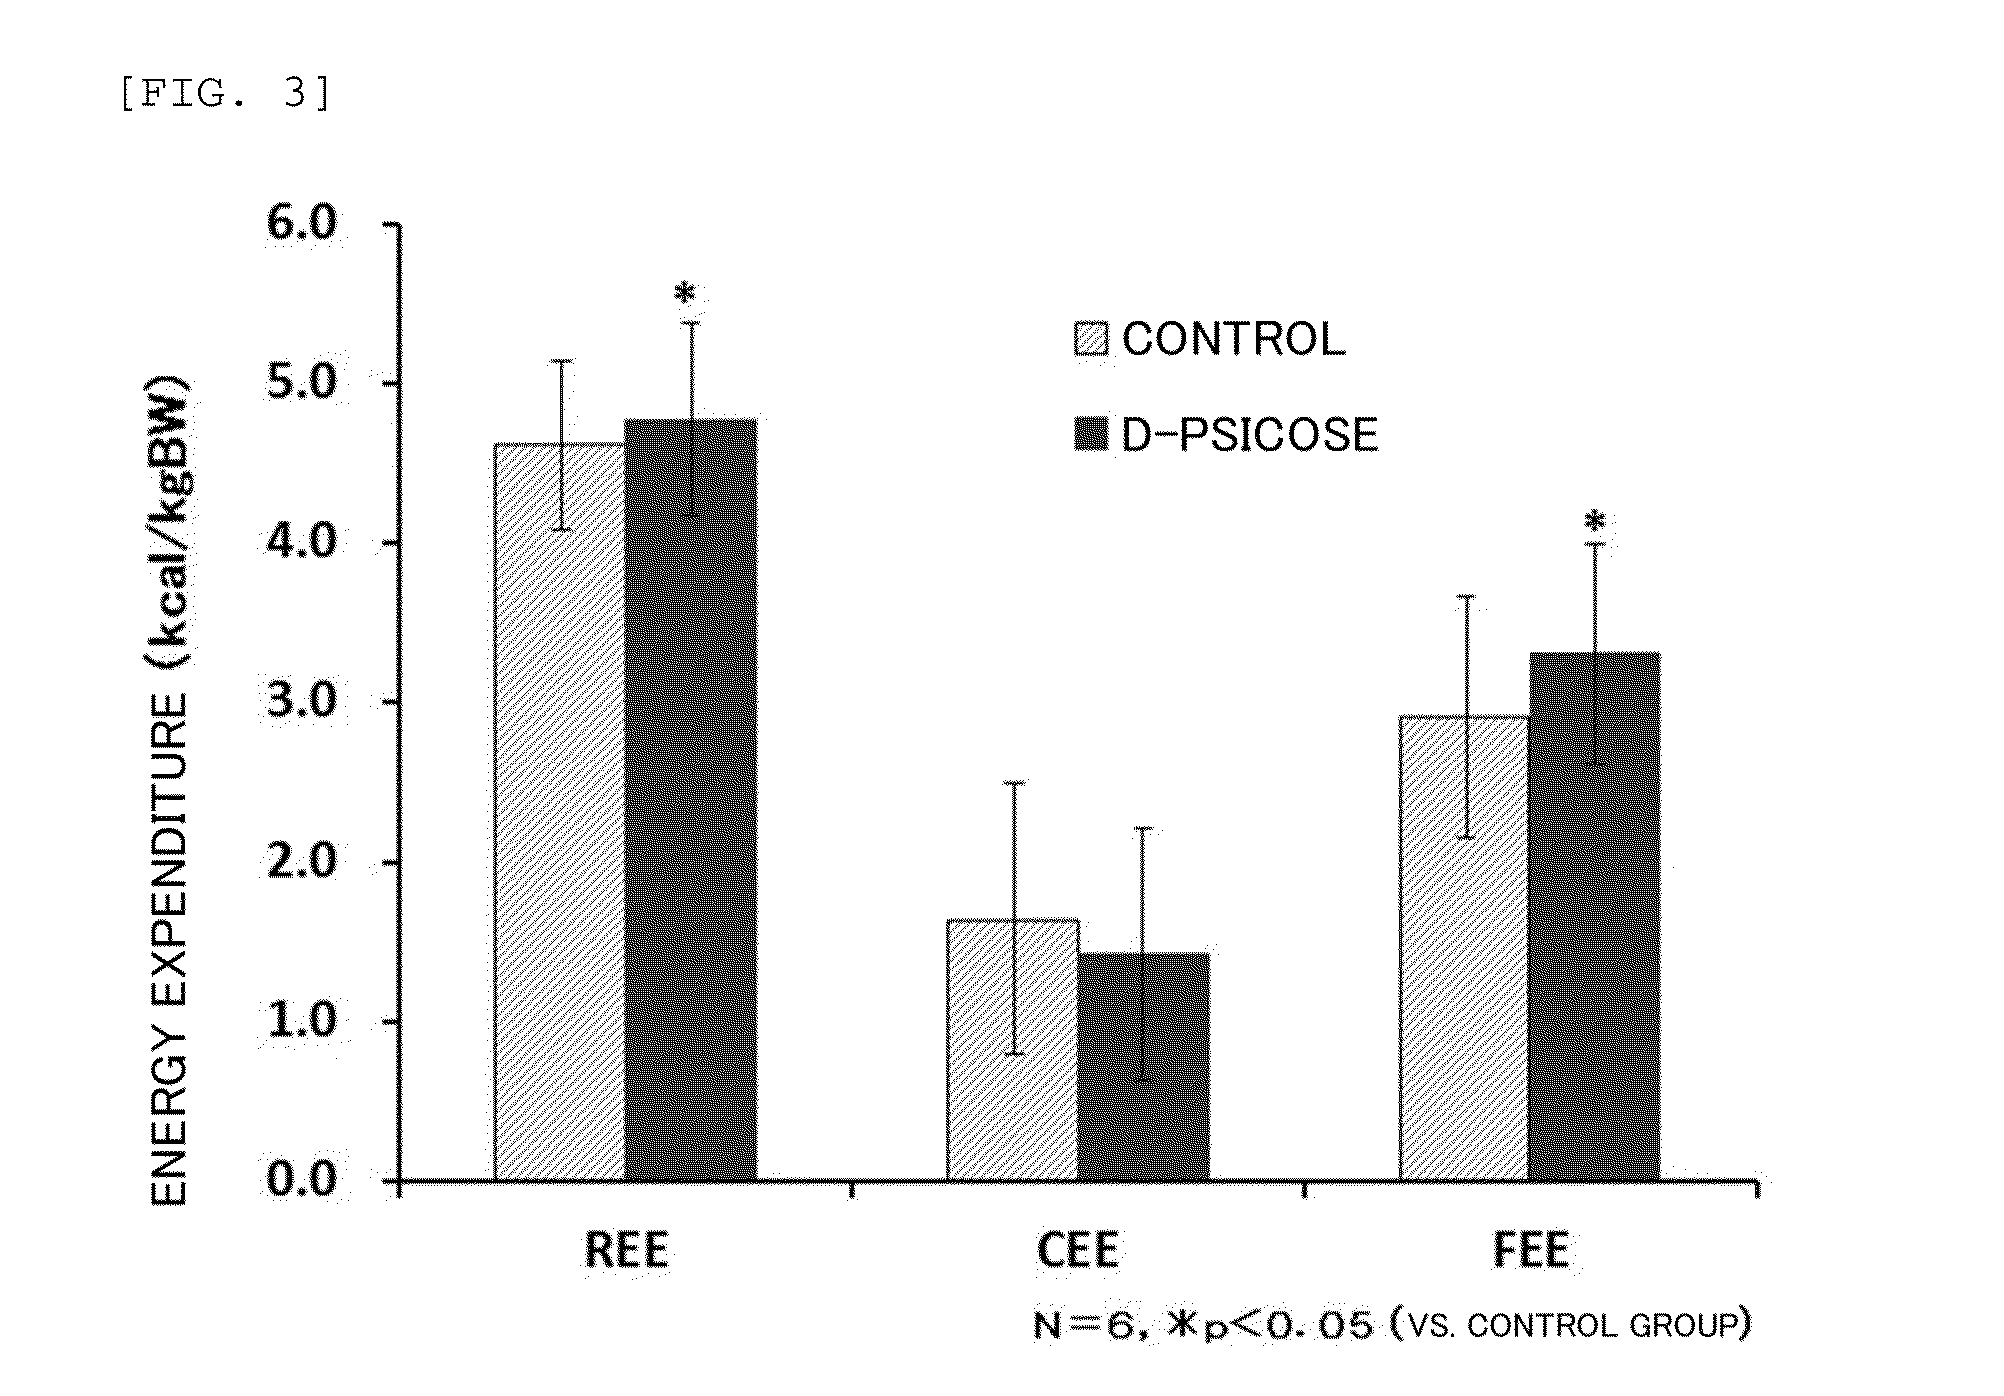 Agent or method for treatement and/or prevention of accelerated energy expenditure and/or diminished energy expenditure functionality